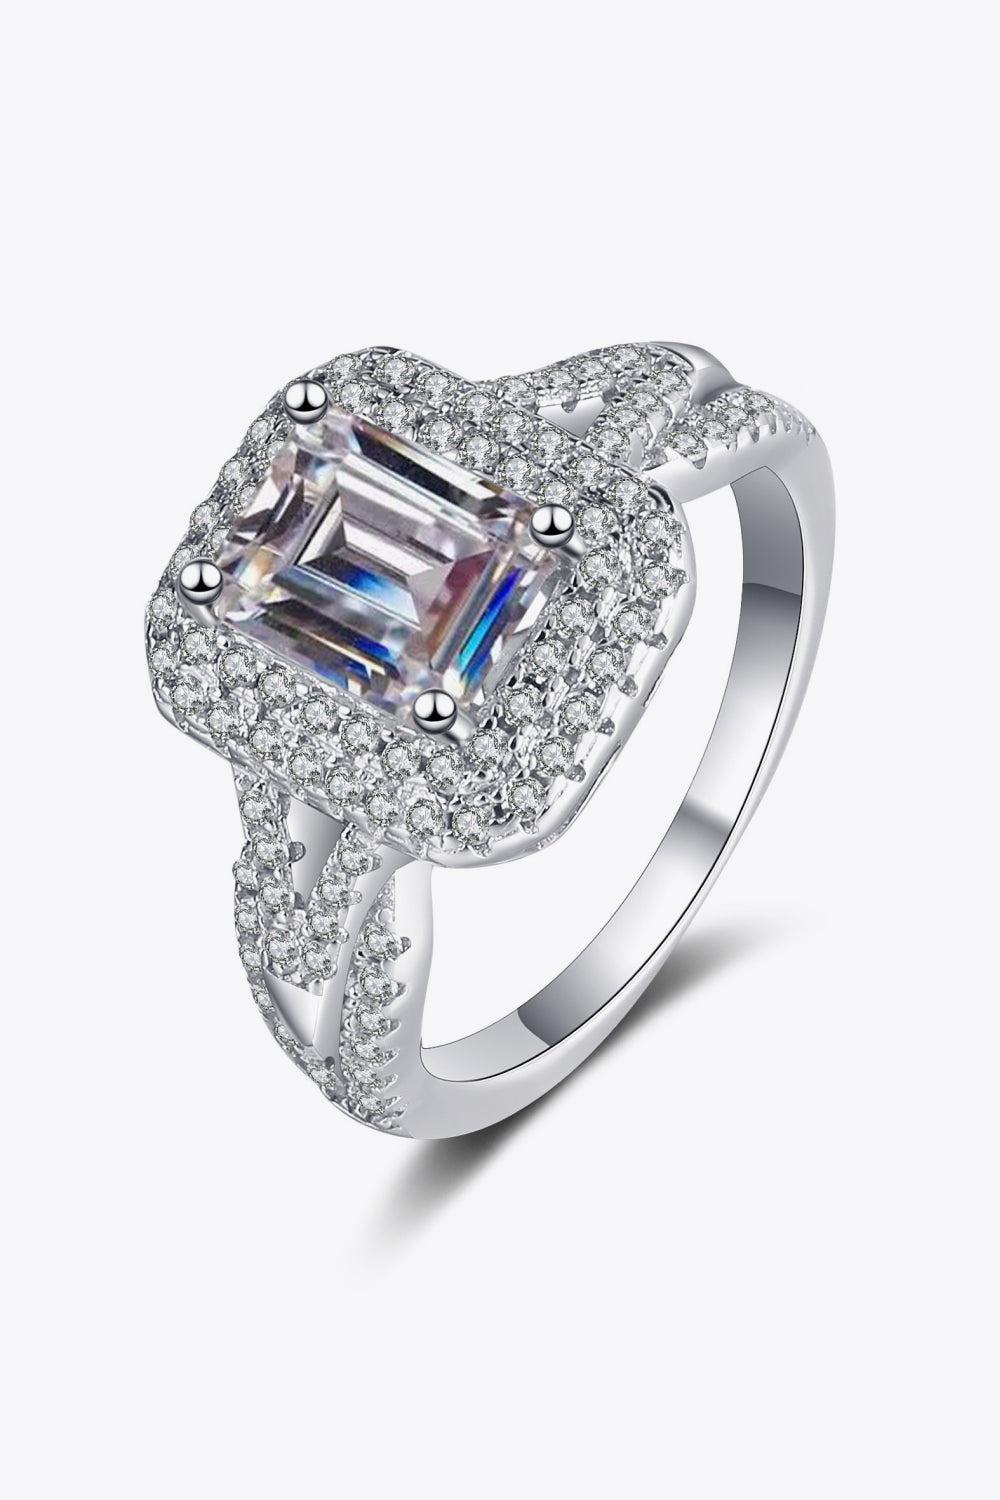 Can't Stop Your Shine 2 Carat Moissanite Ring BLUE ZONE PLANET